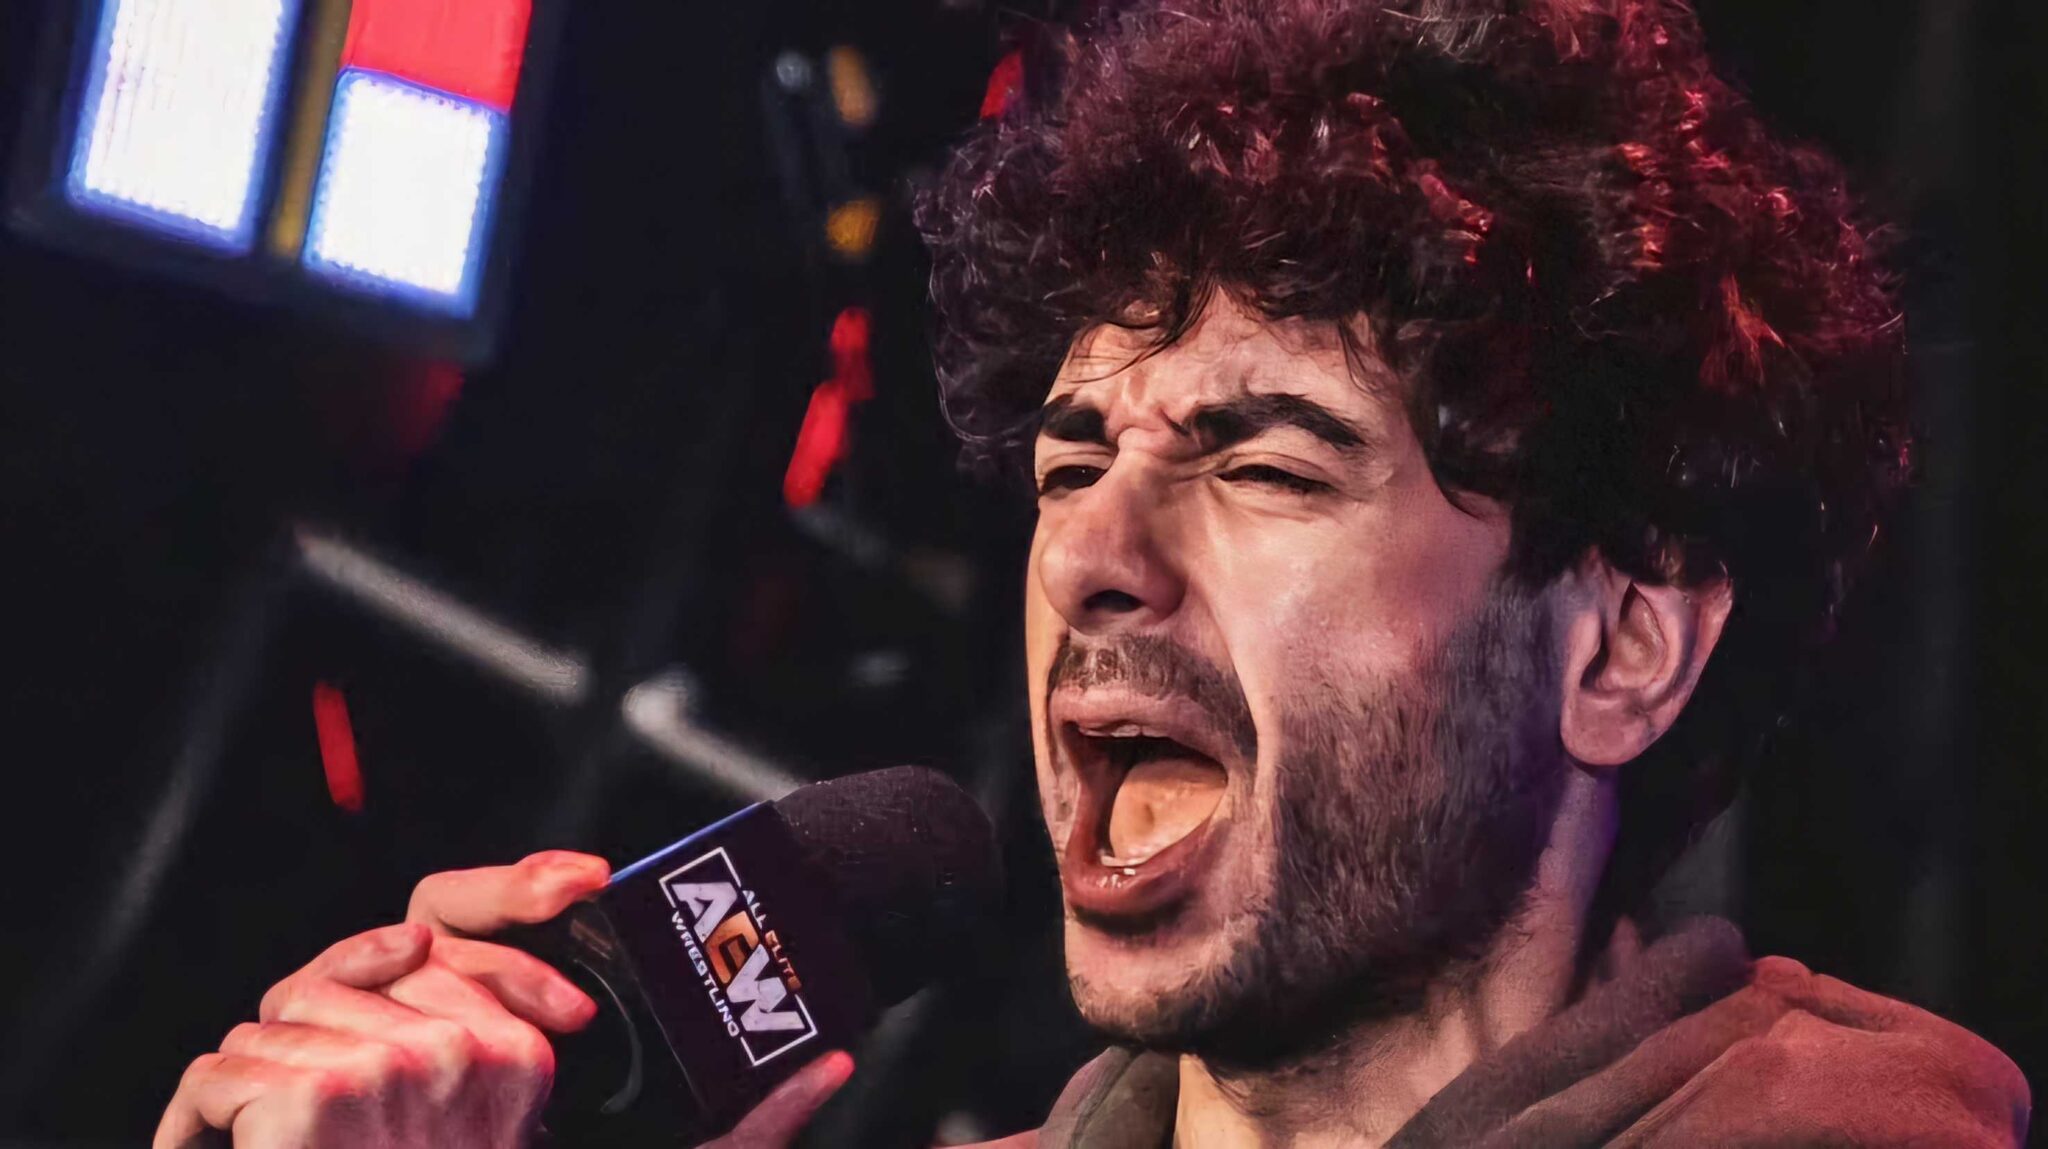 Tony Khan takes a Twitter tirade, saying, ‘I organize wrestling for the eccentric, as I am one myself!’